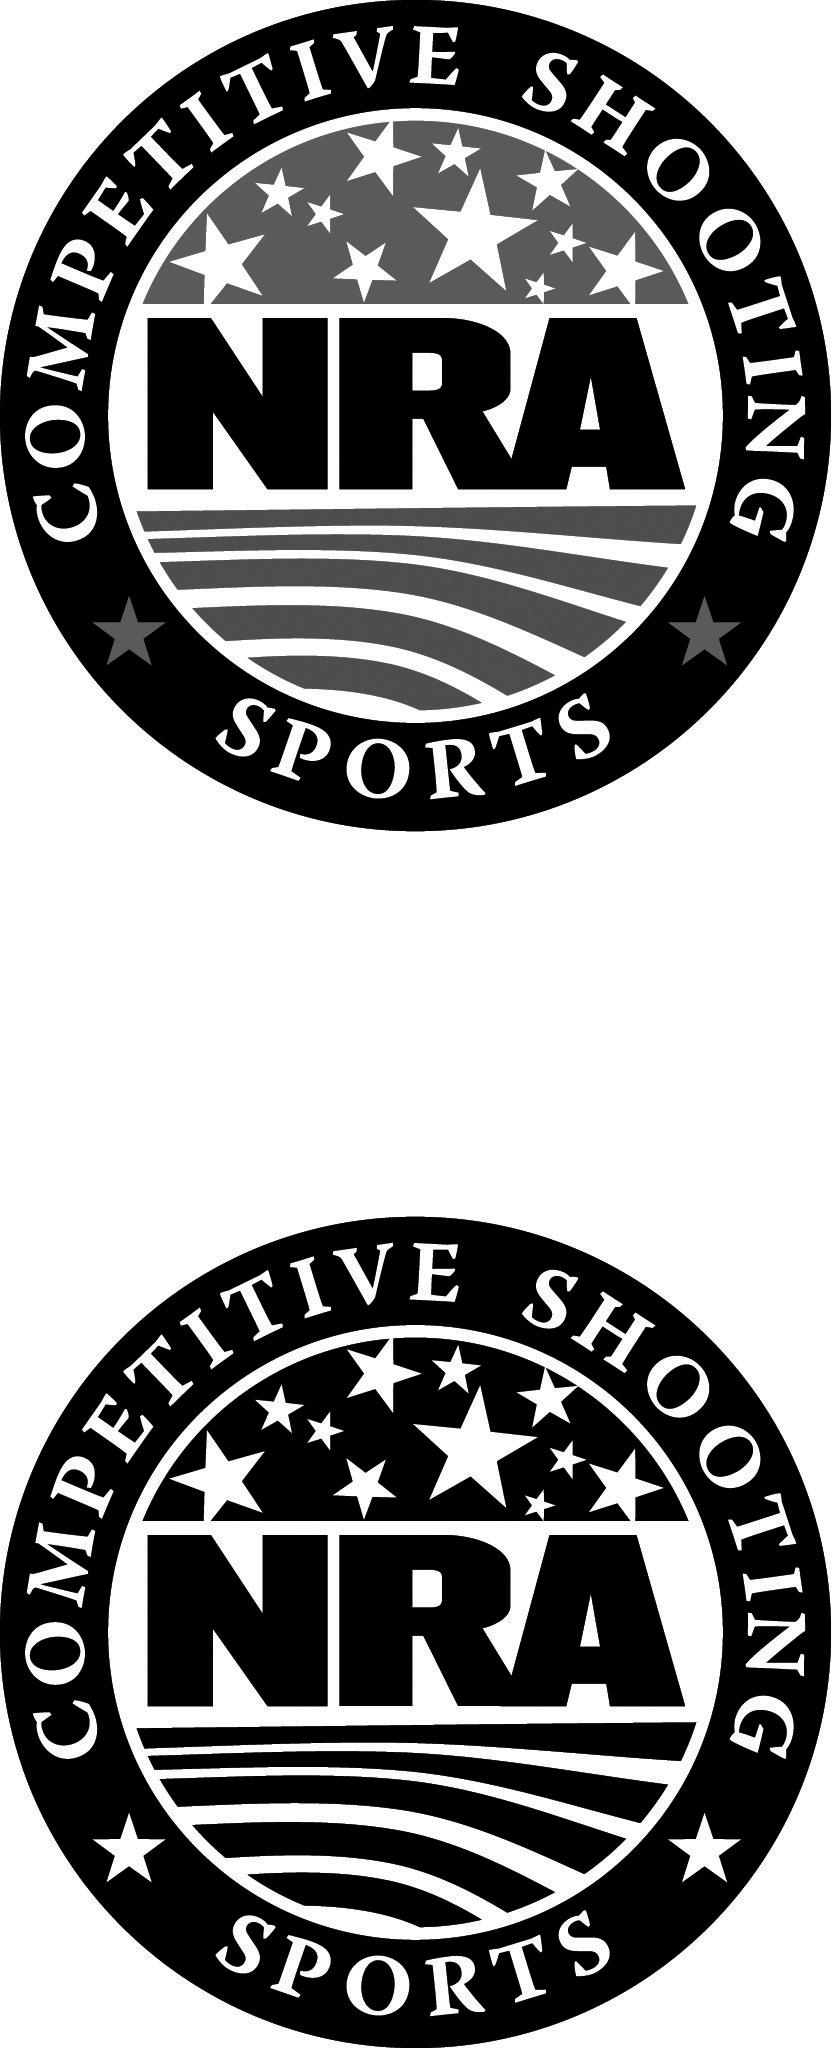 NRA PISTOL RULES (Competitive Shooting Sports Logo) Official Rules